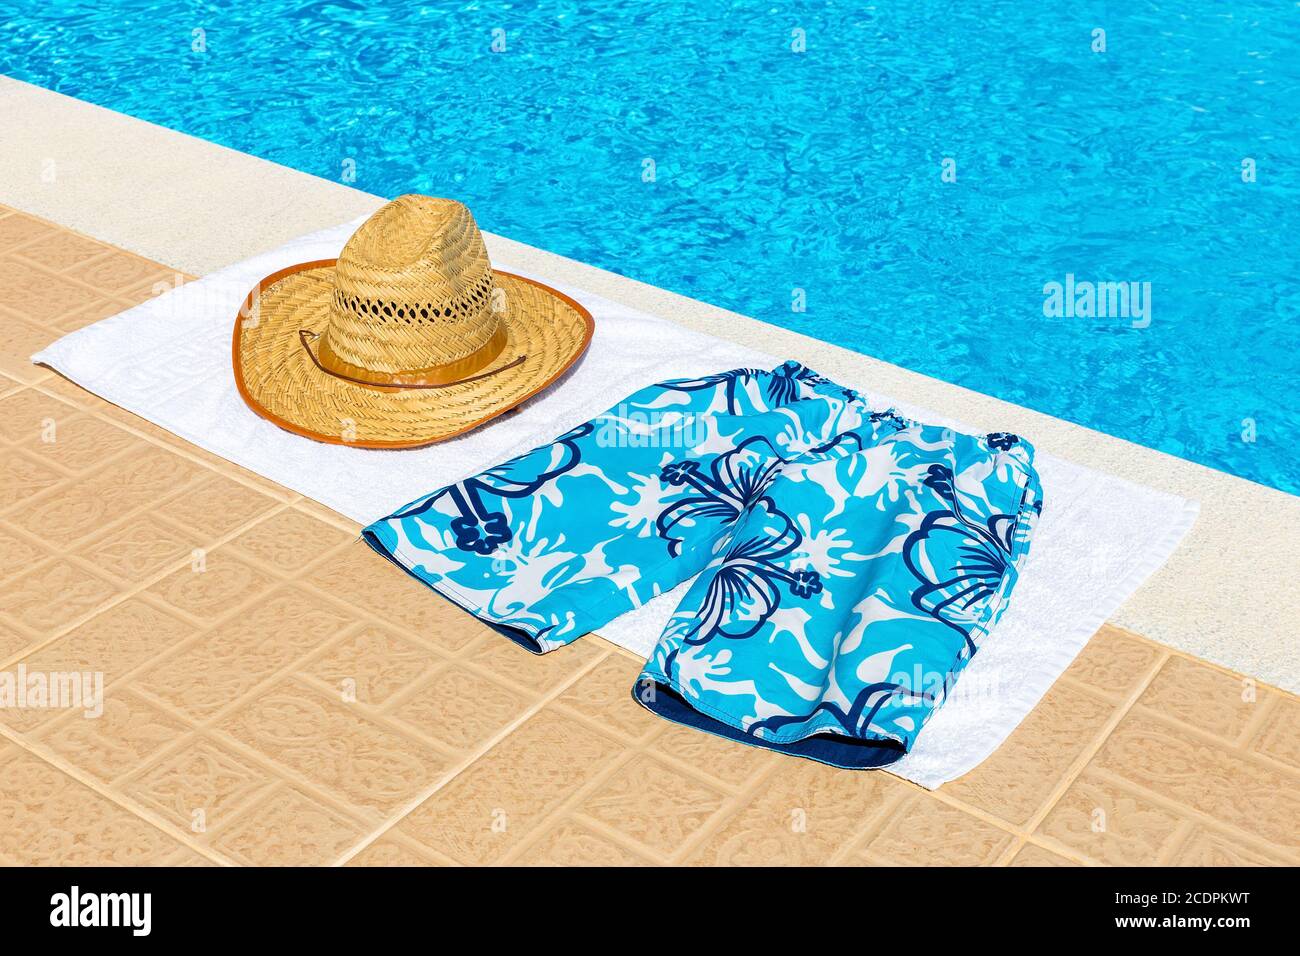 Hat and swimming trunks on towel near swimming pool Stock Photo